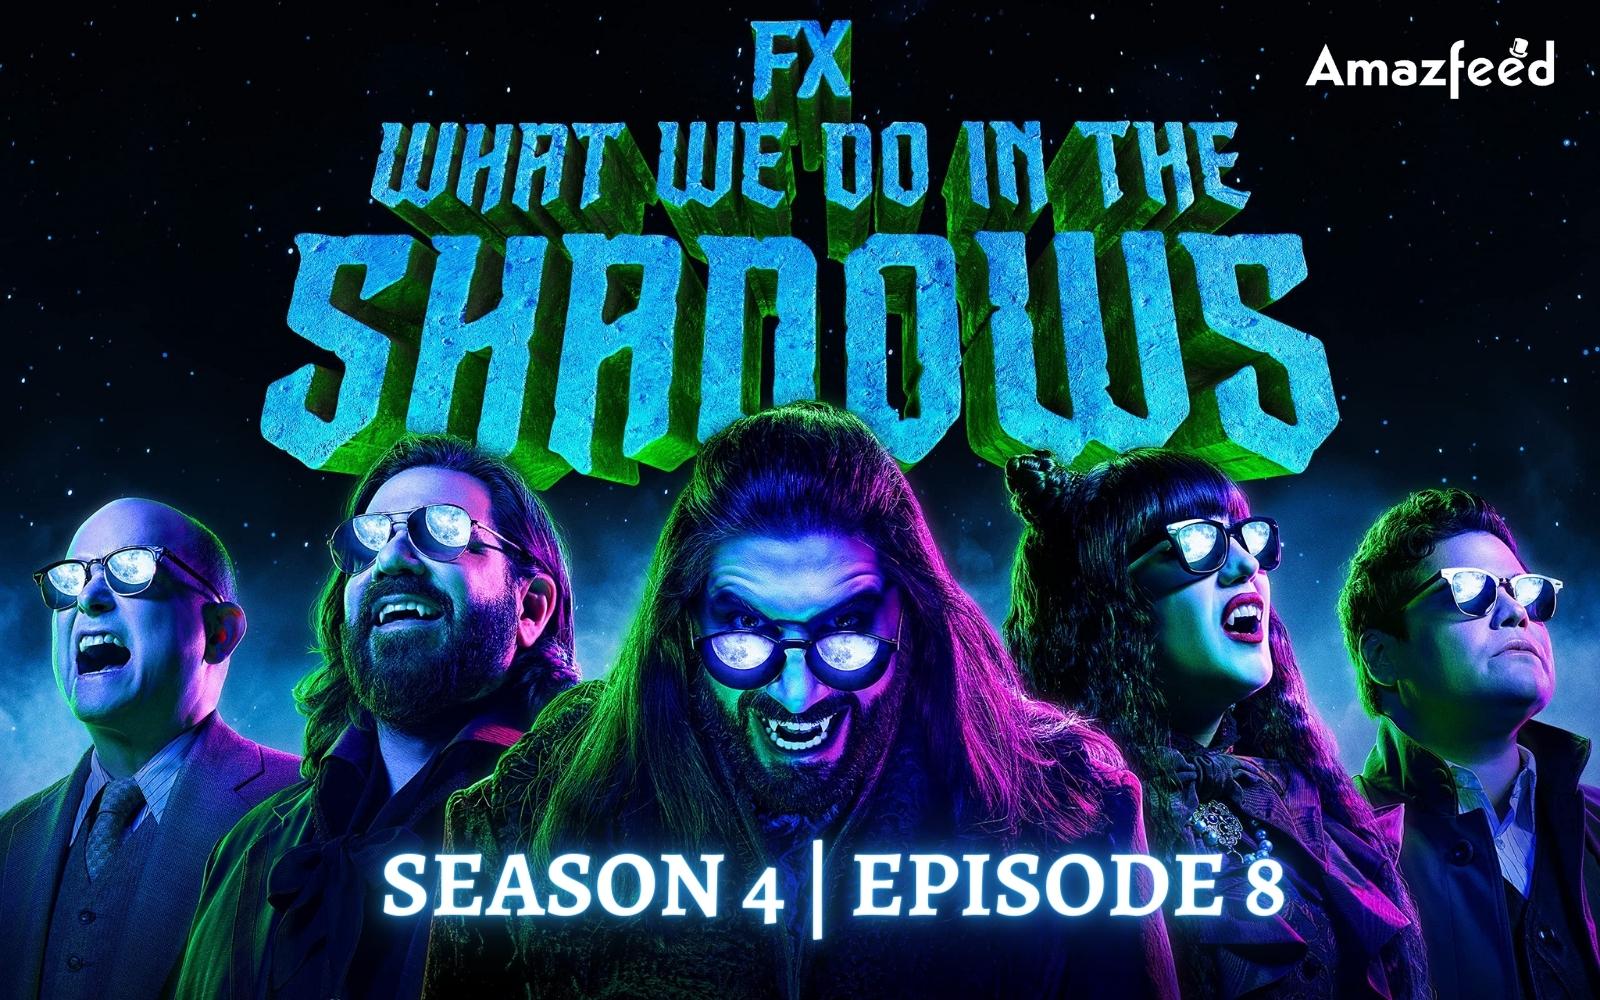 What We Do in the Shadows Season 4 Episode 8 ⇒ Release Date, Recap, Cast, Spoiler and Cast